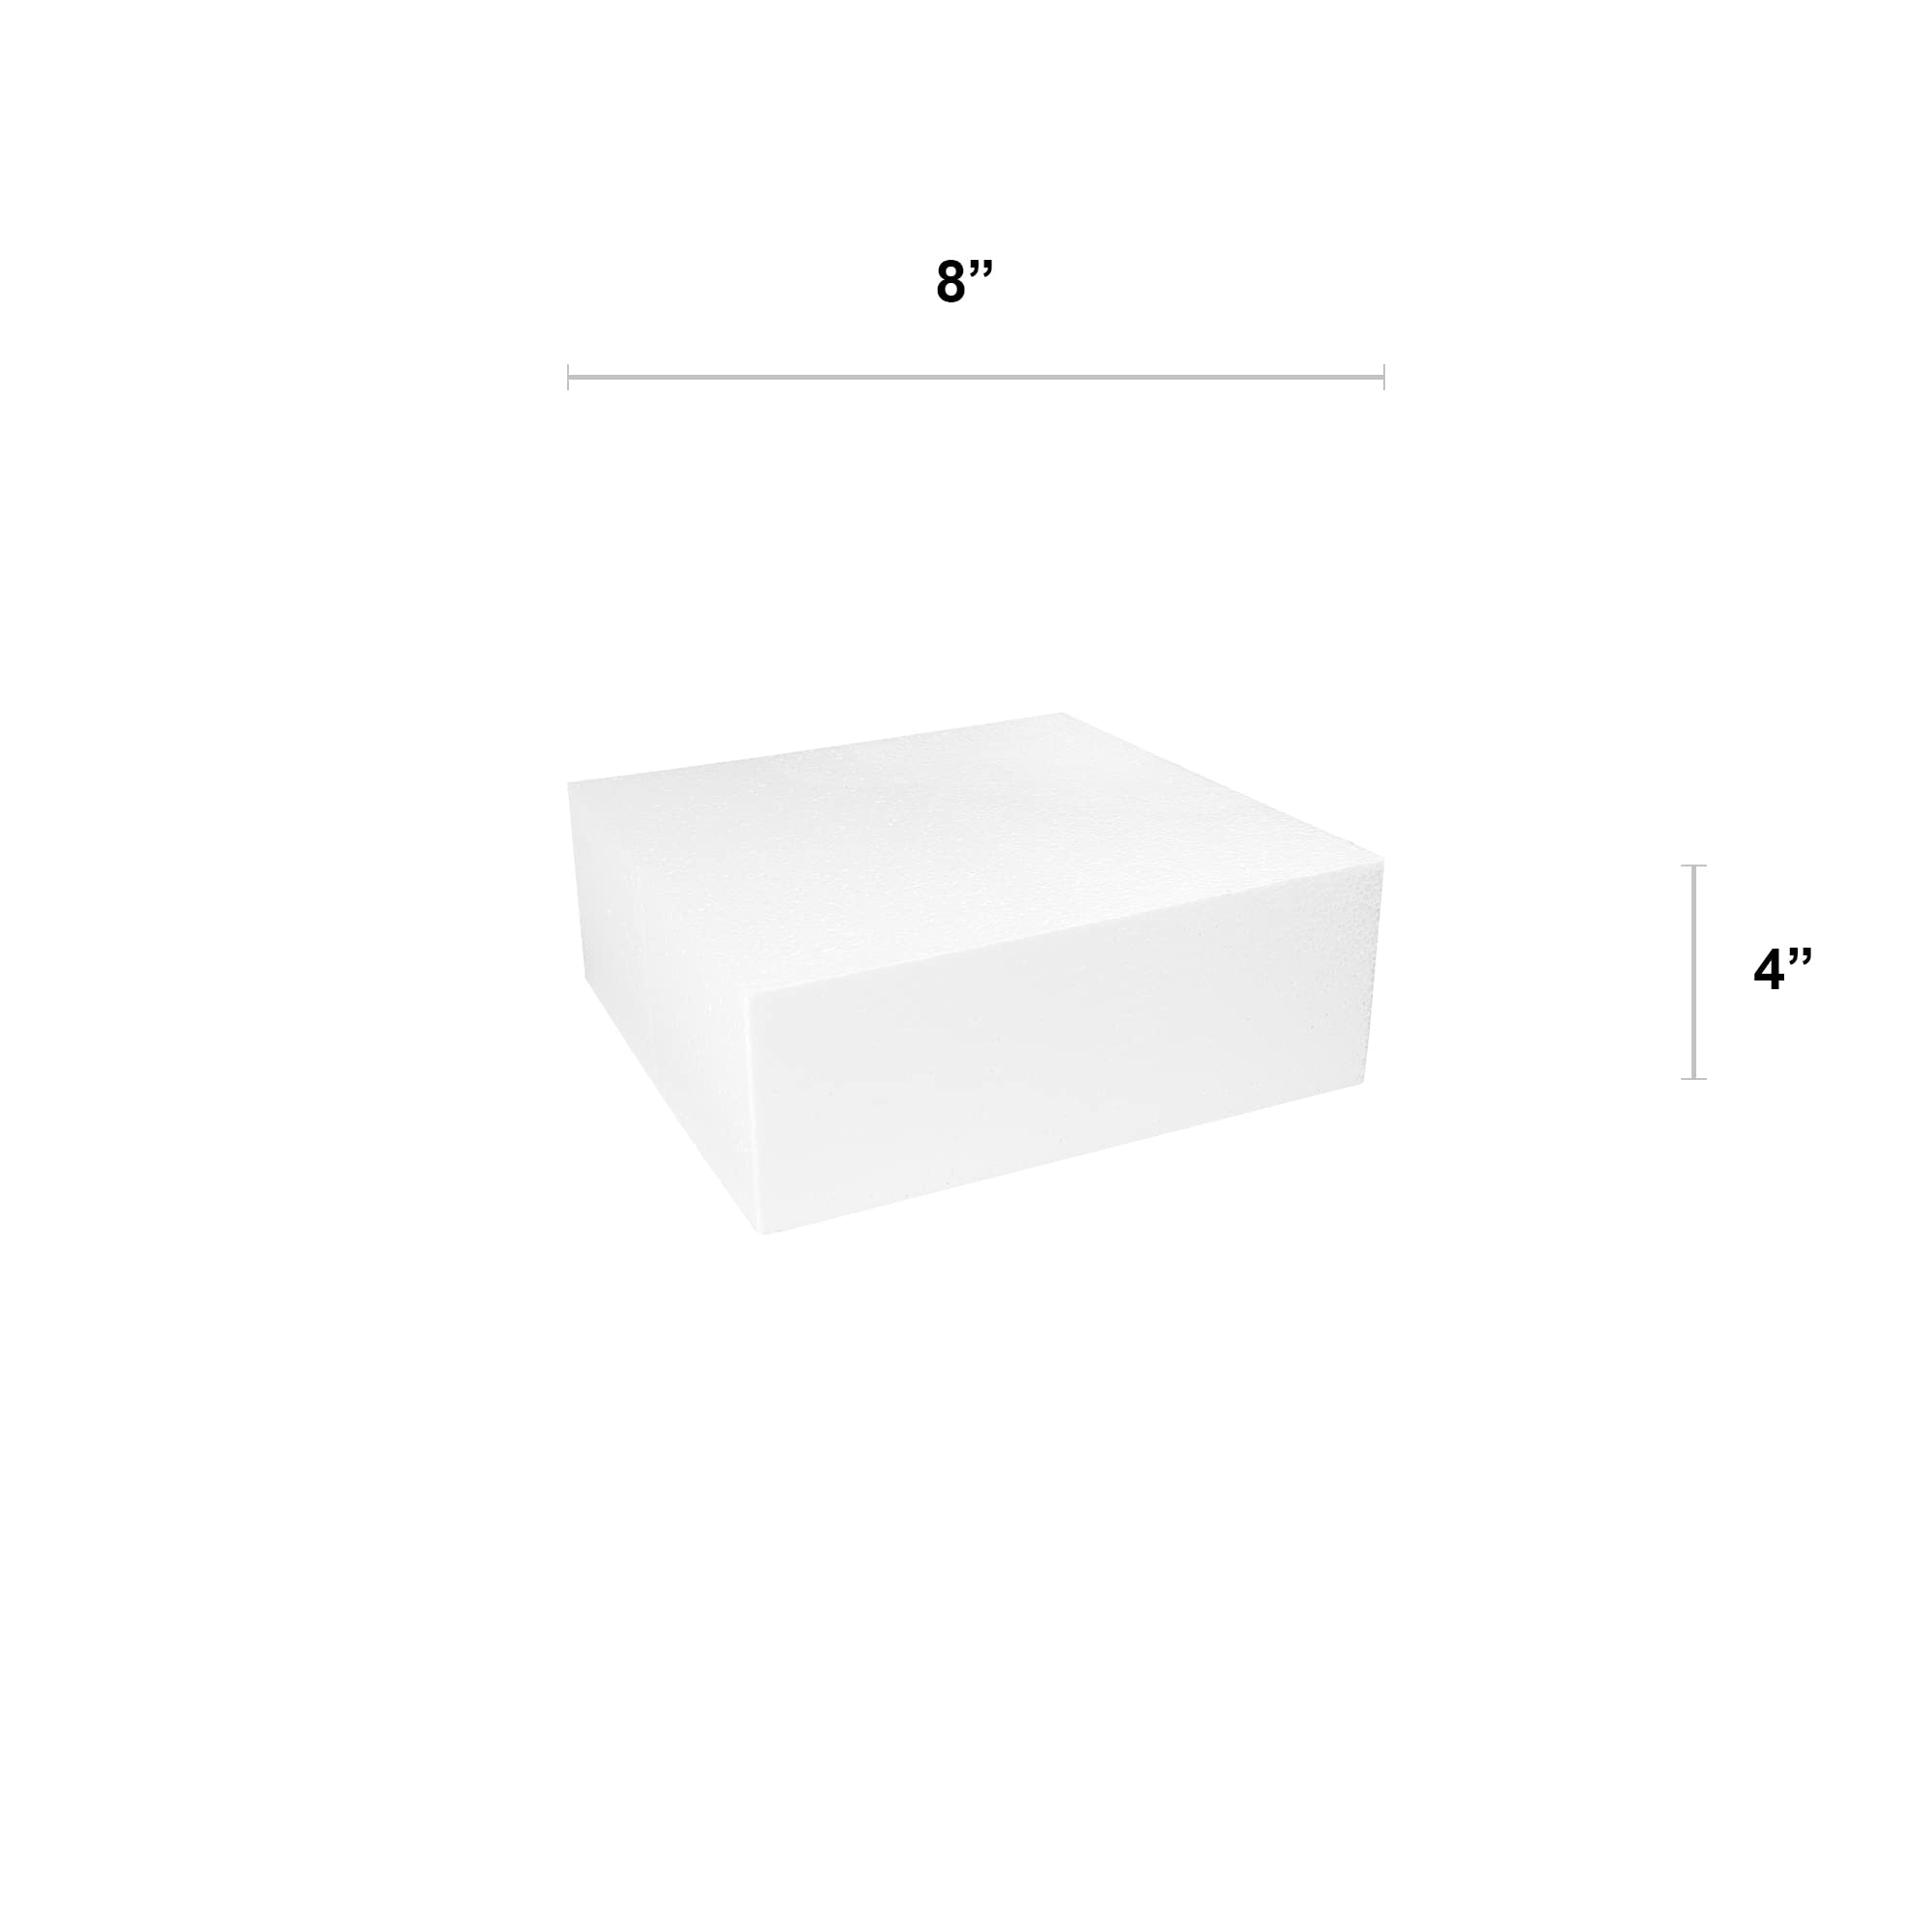 O'Creme Polystyrene Dummy Cake Decorating Display for Baked Goods Bakery Supplies Square Shape (4”H x 8”)